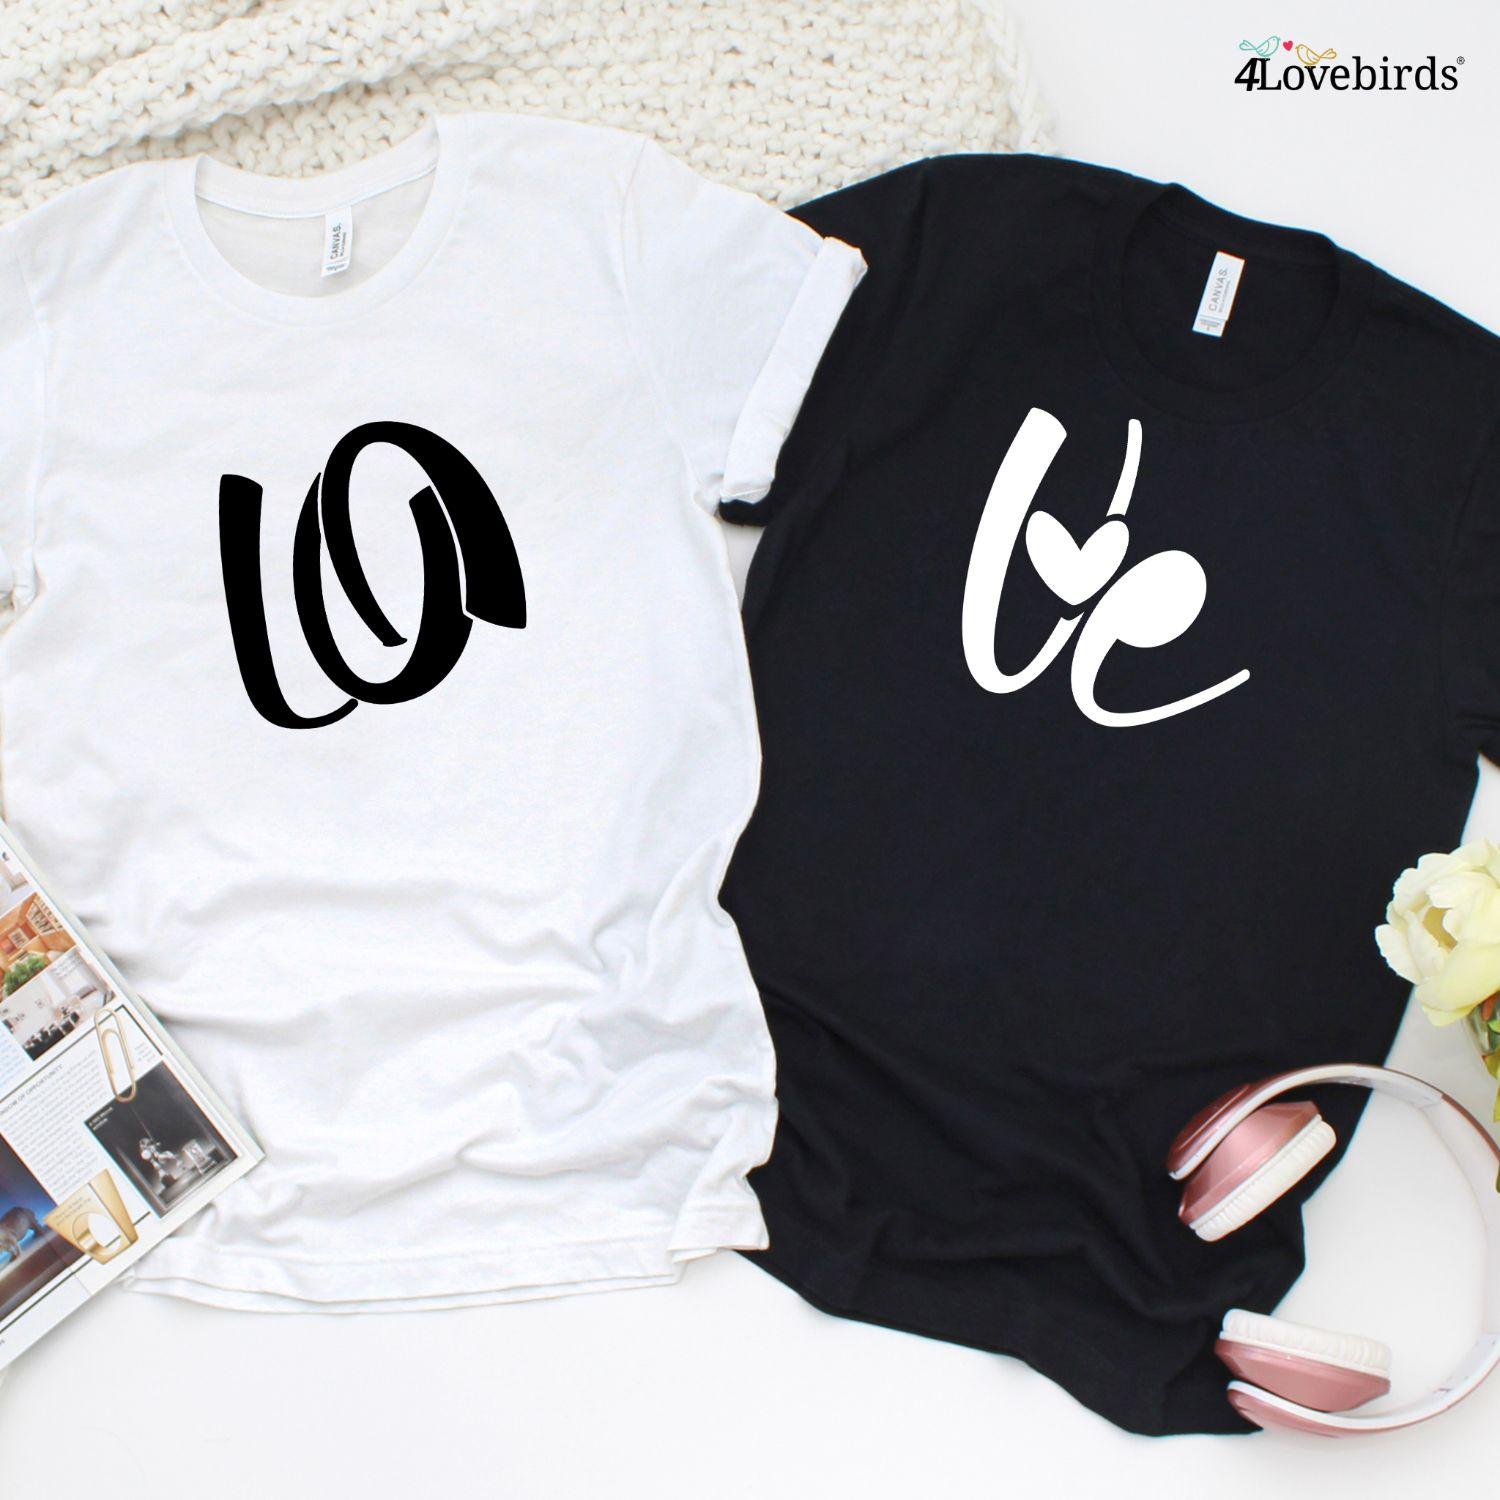 LO & VE Matching Set: His & Hers Outfit for Couples to Share Love - 4Lovebirds